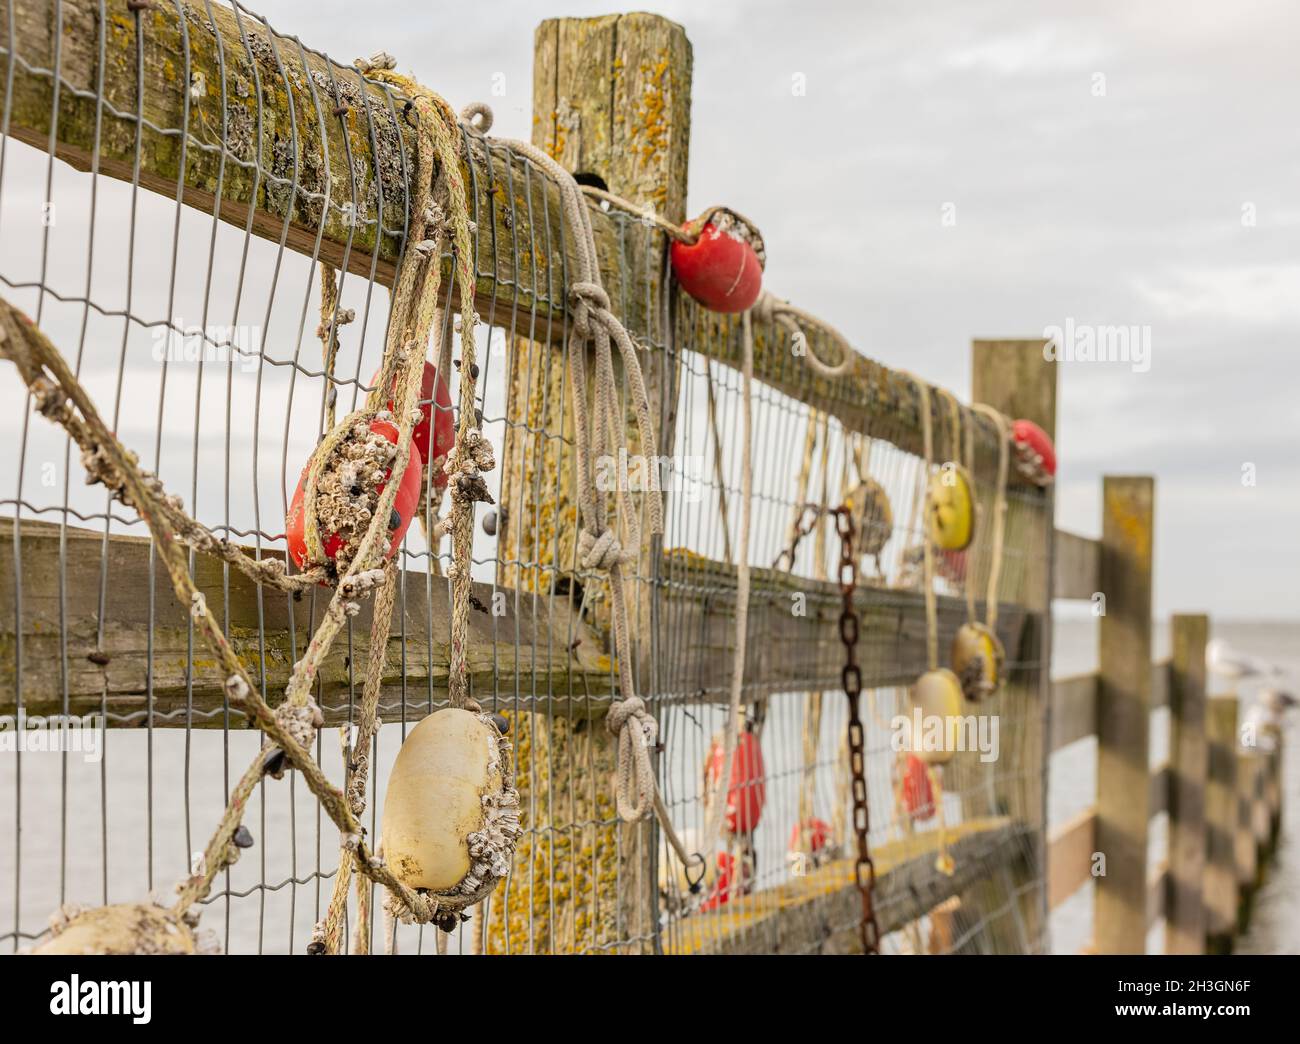 https://c8.alamy.com/comp/2H3GN6F/fishing-net-with-red-floats-hanging-on-a-fence-waiting-for-better-weather-side-view-selective-focus-blurred-background-nobody-2H3GN6F.jpg